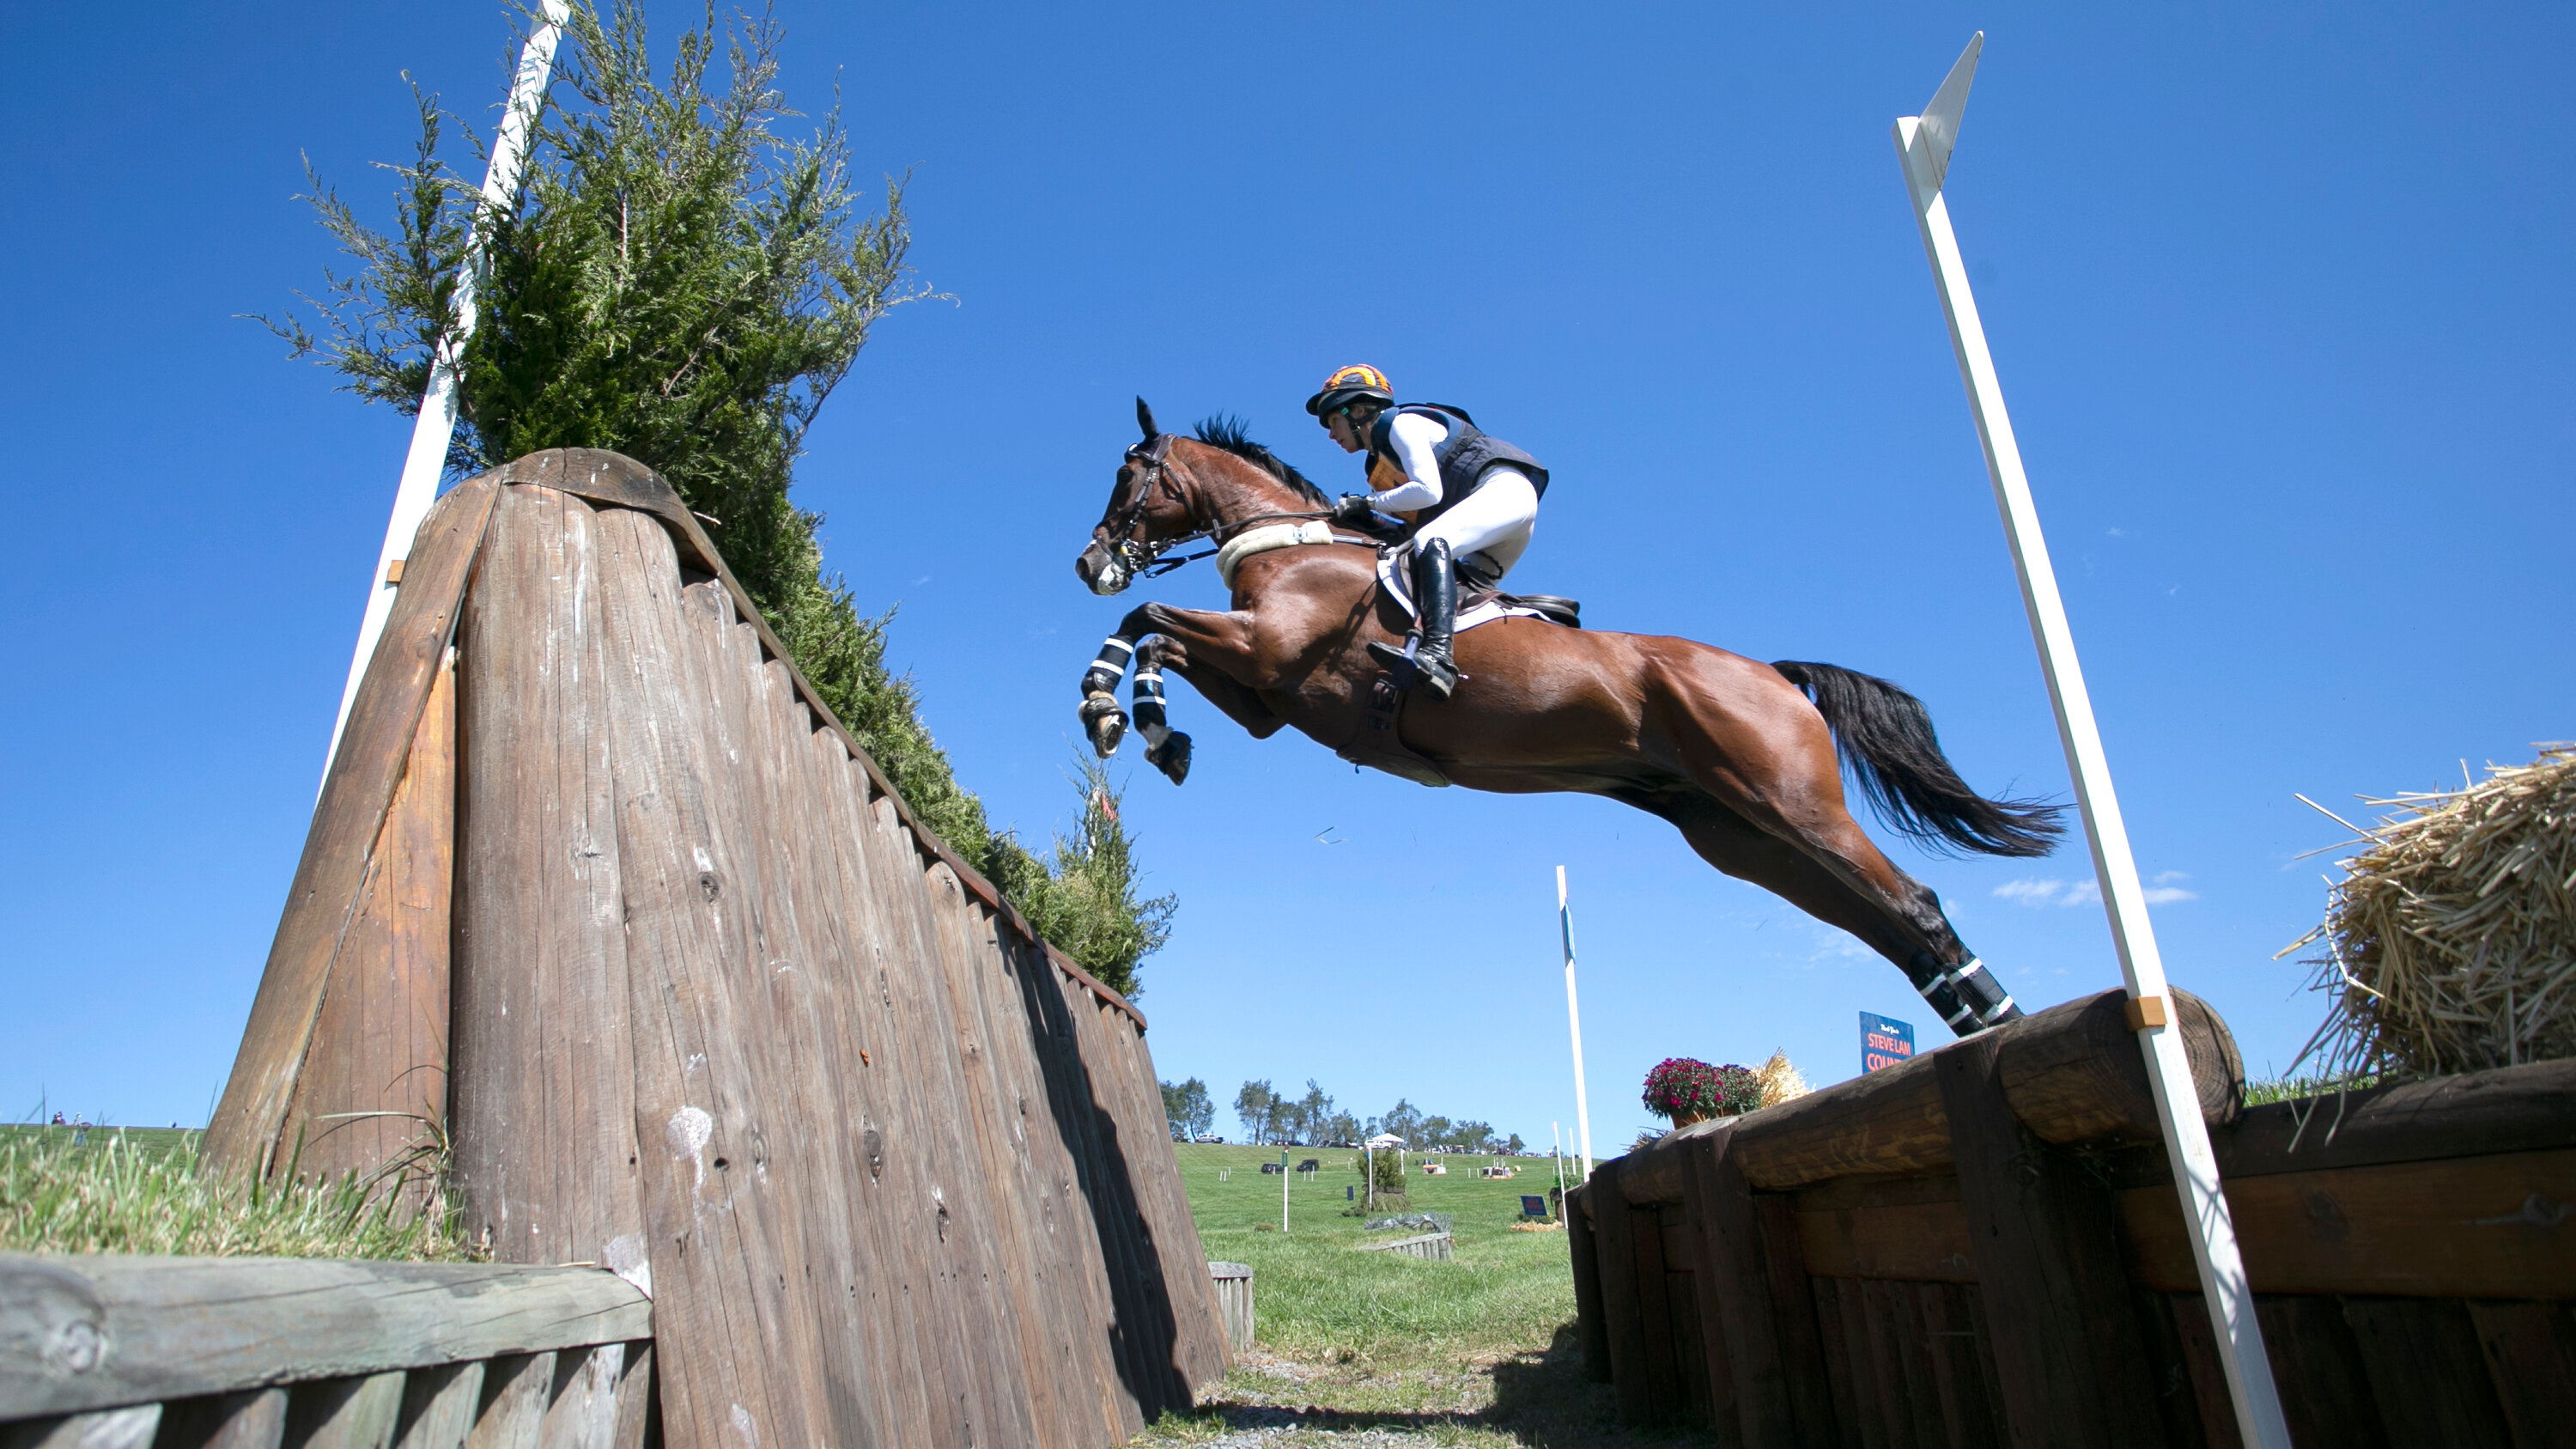 Eventing: Cross-country riding, An extreme equestrian sport and a part of a three-day championship. 3000x1690 HD Wallpaper.